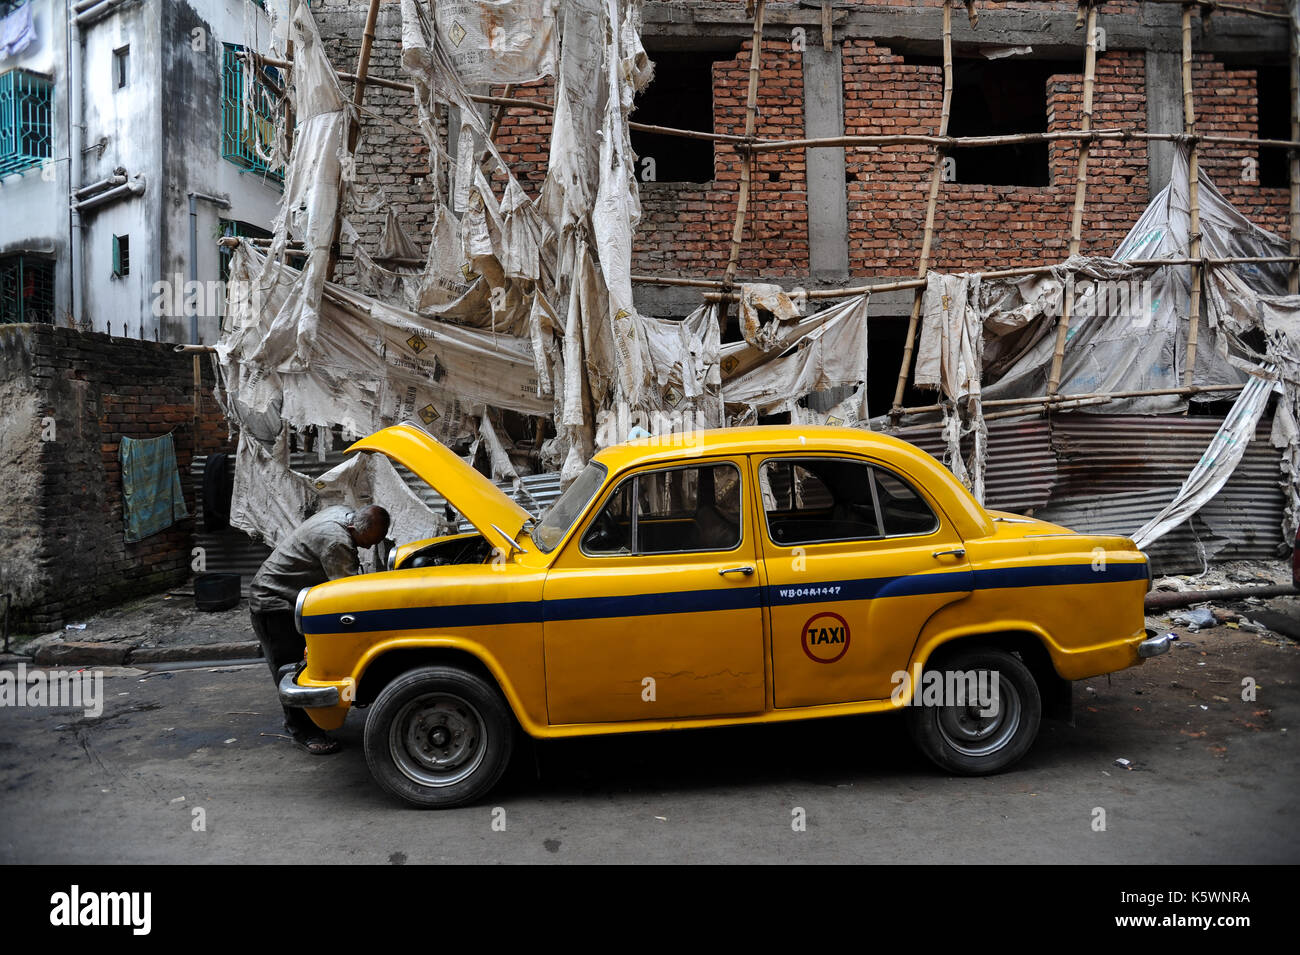 03.12.2011, Kolkata, West Bengal, India, Asia - A cab driver looks under the bonnet of his yellow taxi of the Hindustan Ambassador brand in Kolkata. Stock Photo